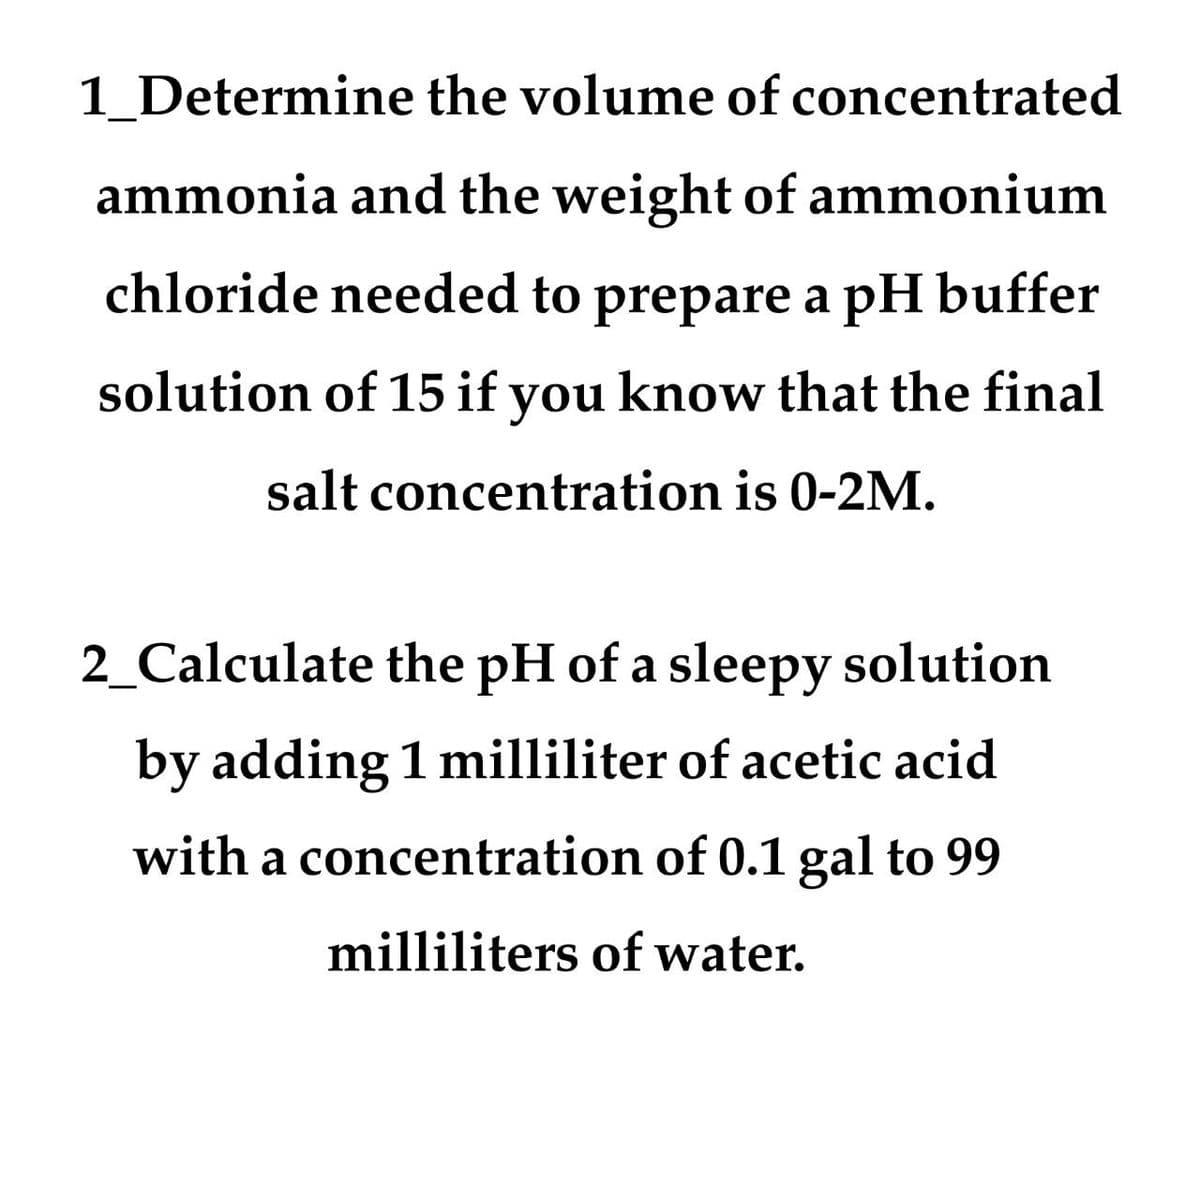 1_Determine the volume of concentrated
ammonia and the weight of ammonium
chloride needed to prepare a pH buffer
solution of 15 if you know that the final
salt concentration is 0-2M.
2_Calculate the pH of a sleepy solution
by adding 1 milliliter of acetic acid
with a concentration of 0.1 gal to 99
milliliters of water.
